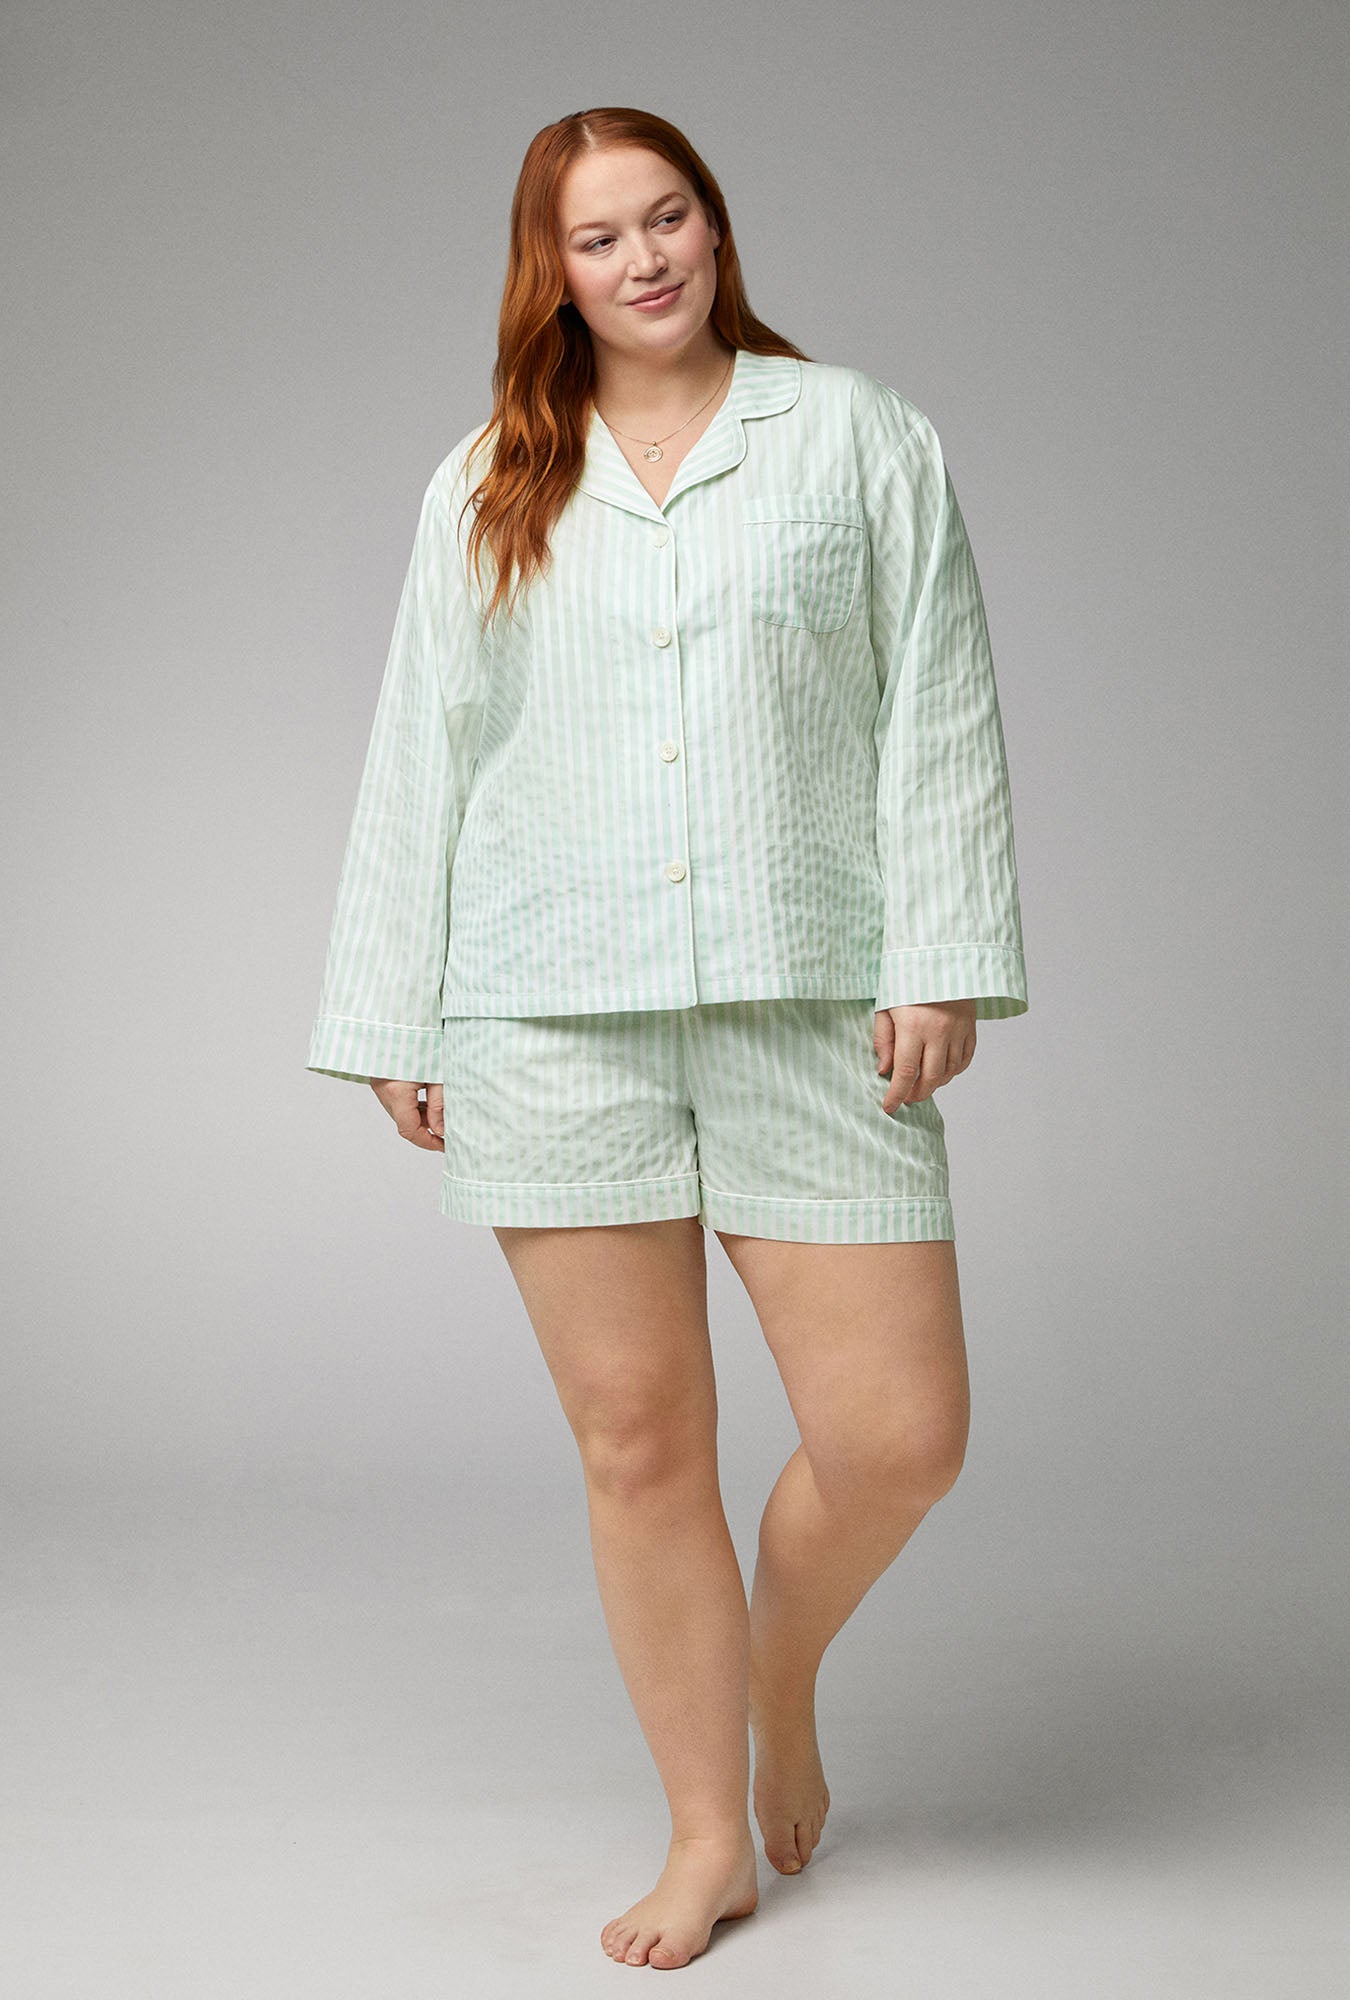 A lady wearing Long Sleeve Classic Woven Cotton Sateen Shorty PJ Set with Mint 3D Stripe print